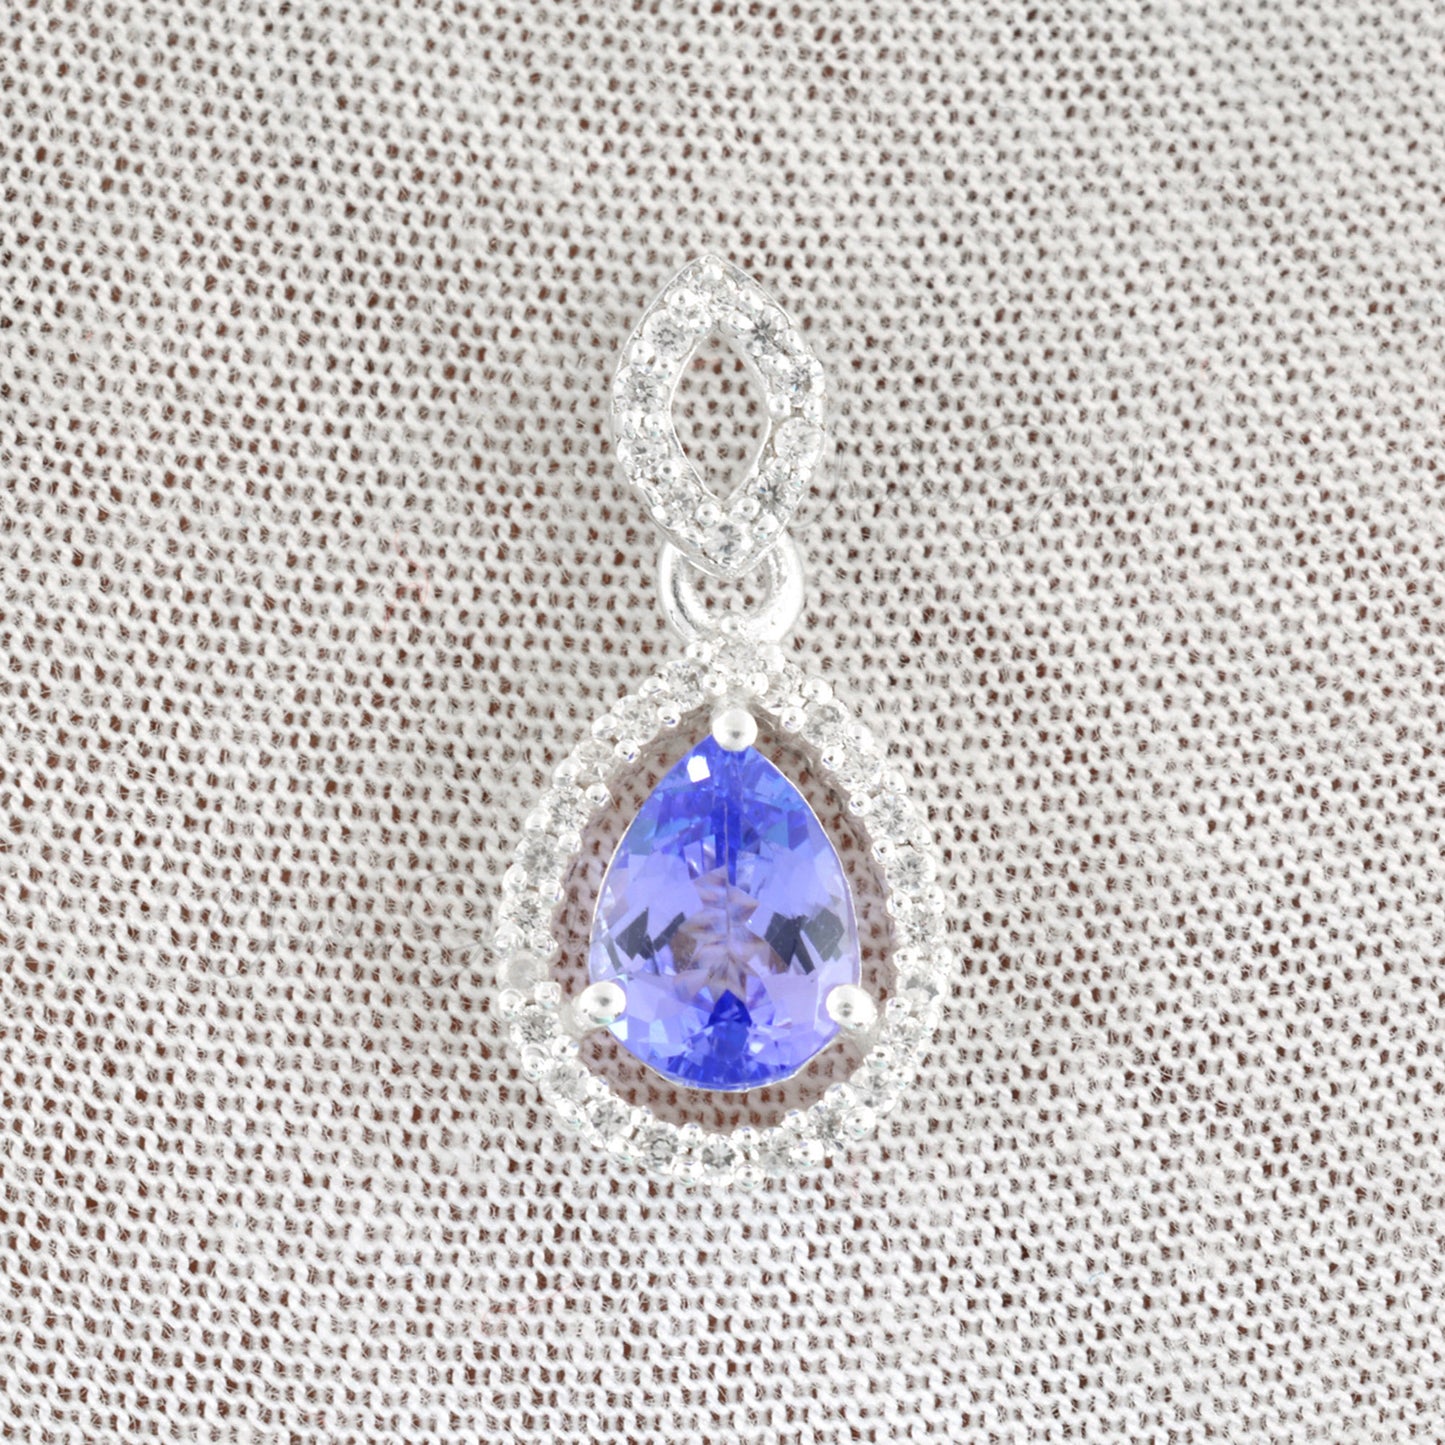 925 Sterling Silver Natural Tanzanite And Zircon Dangling Pendant With Pear Cut December Birthstone Jewelry At Discount Price